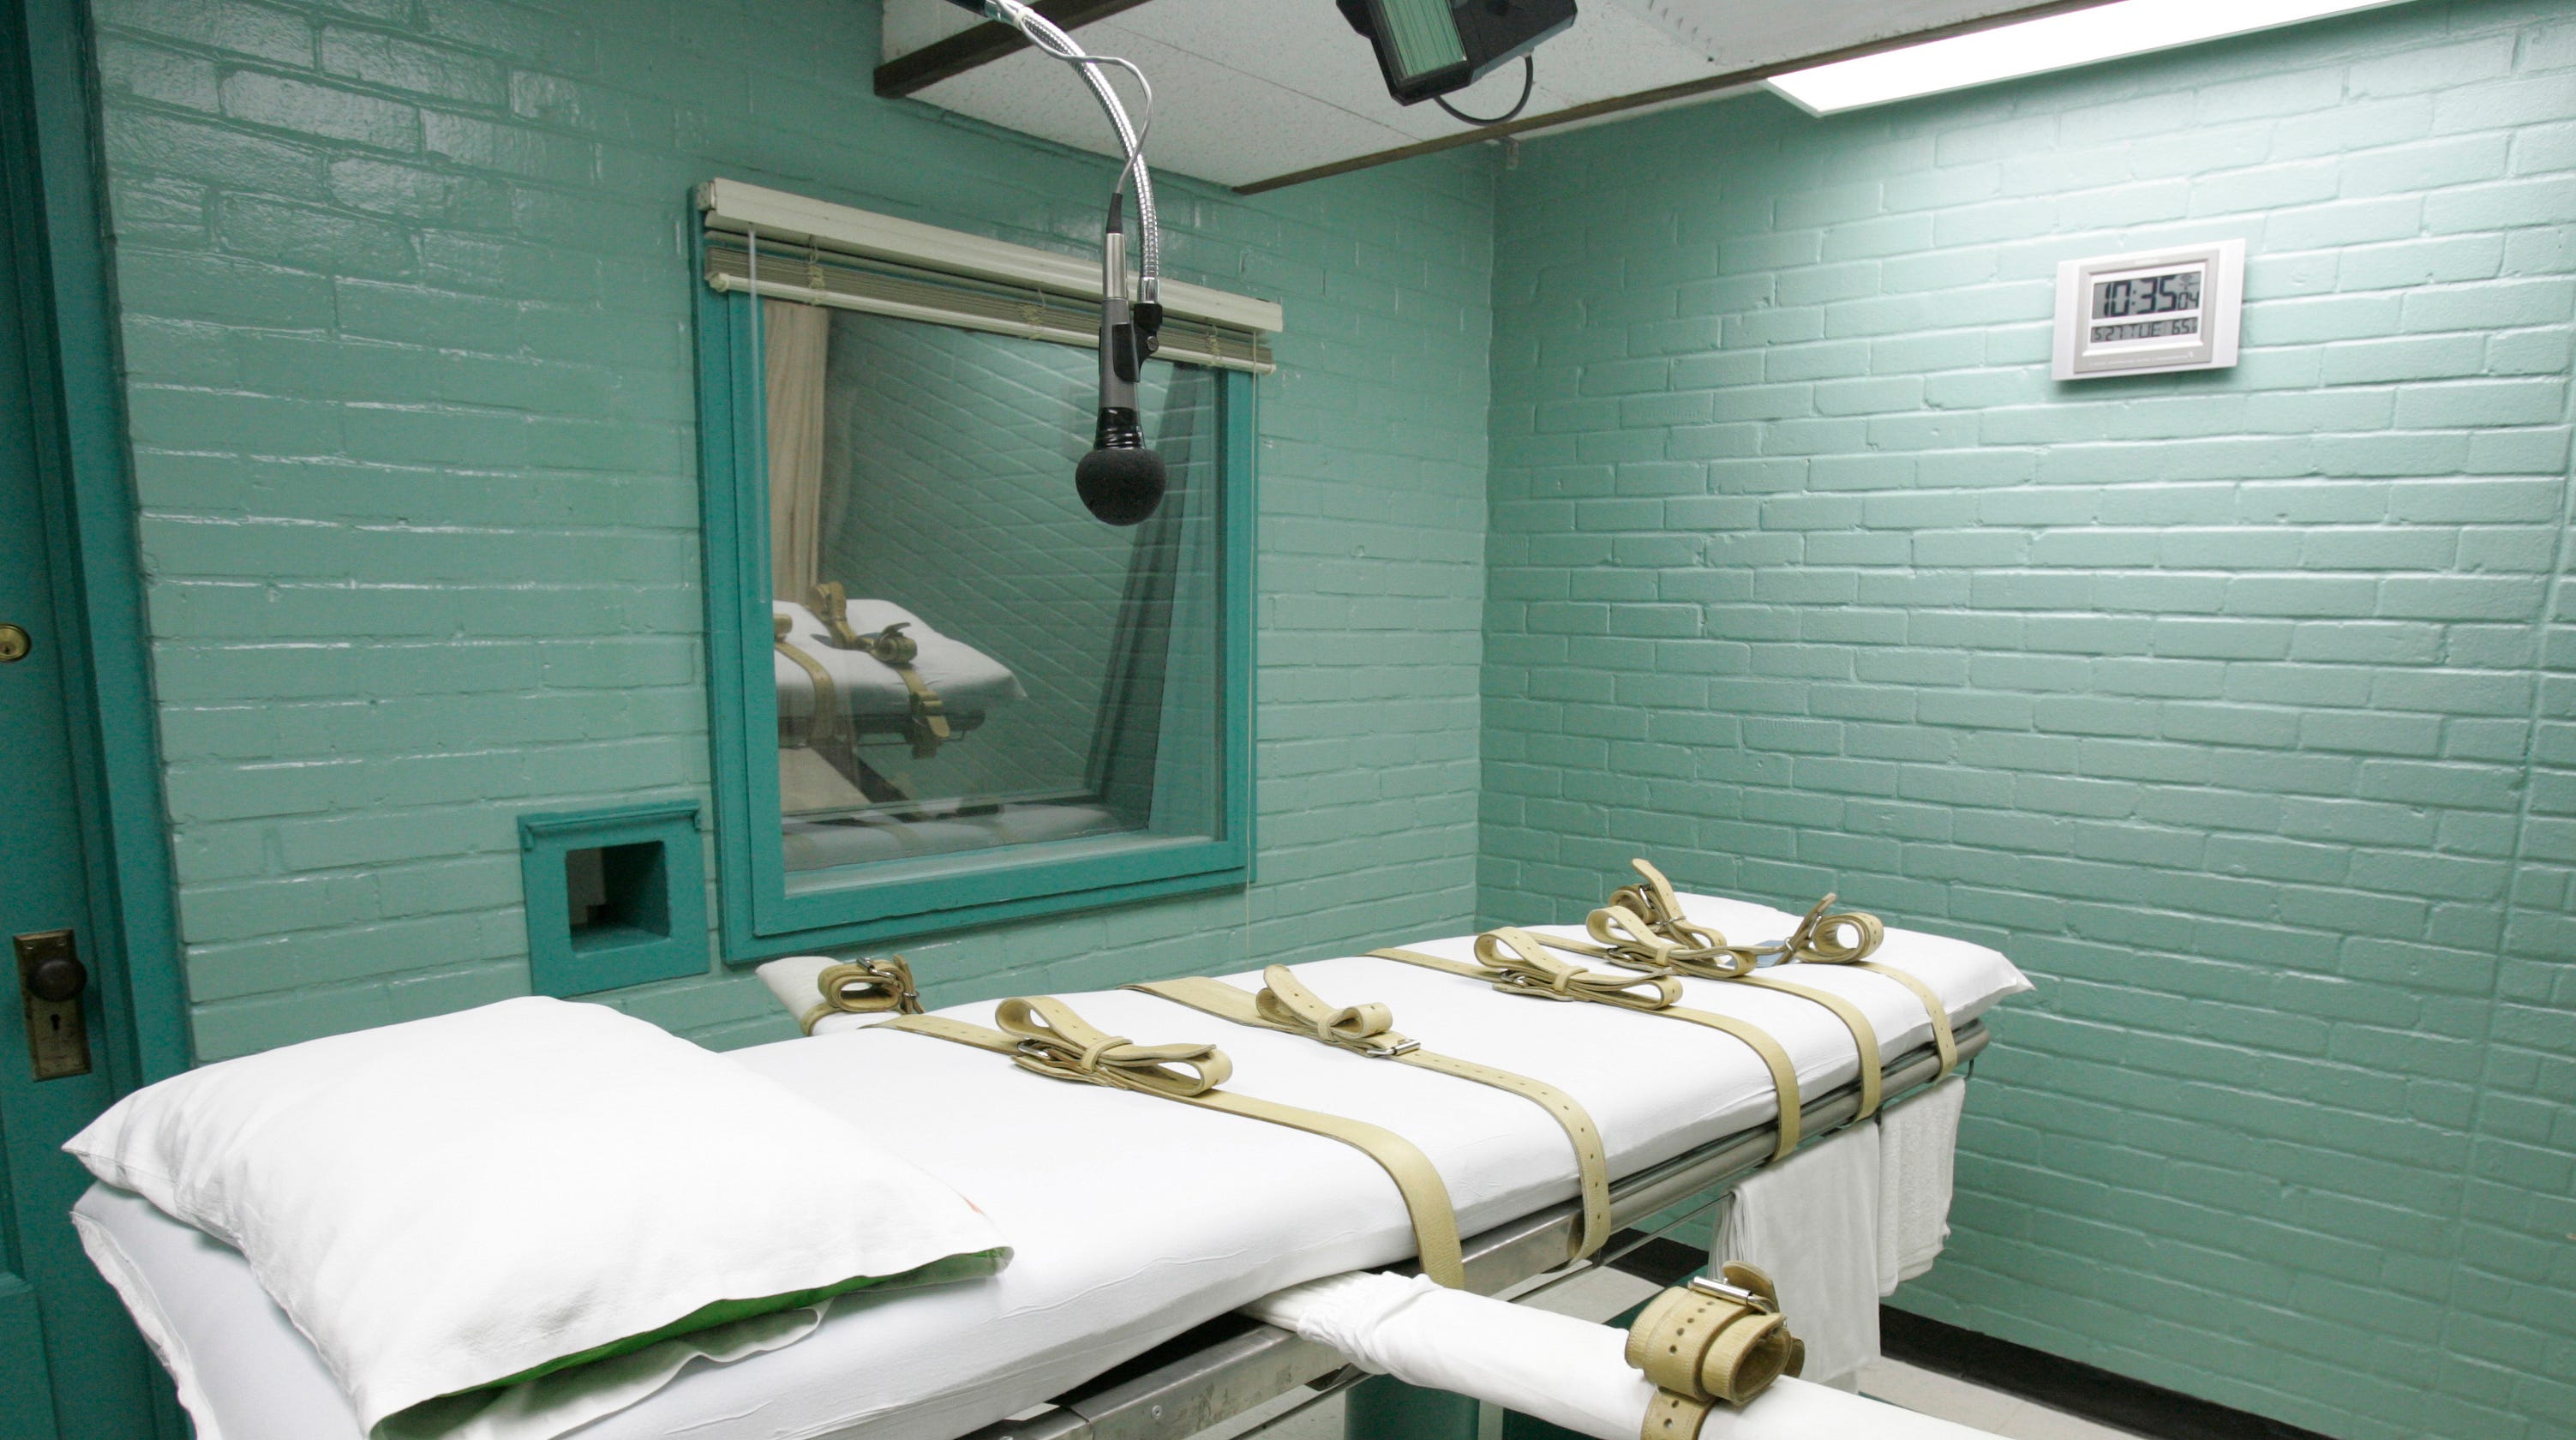 Texas executions All prison chaplains banned from execution chamber